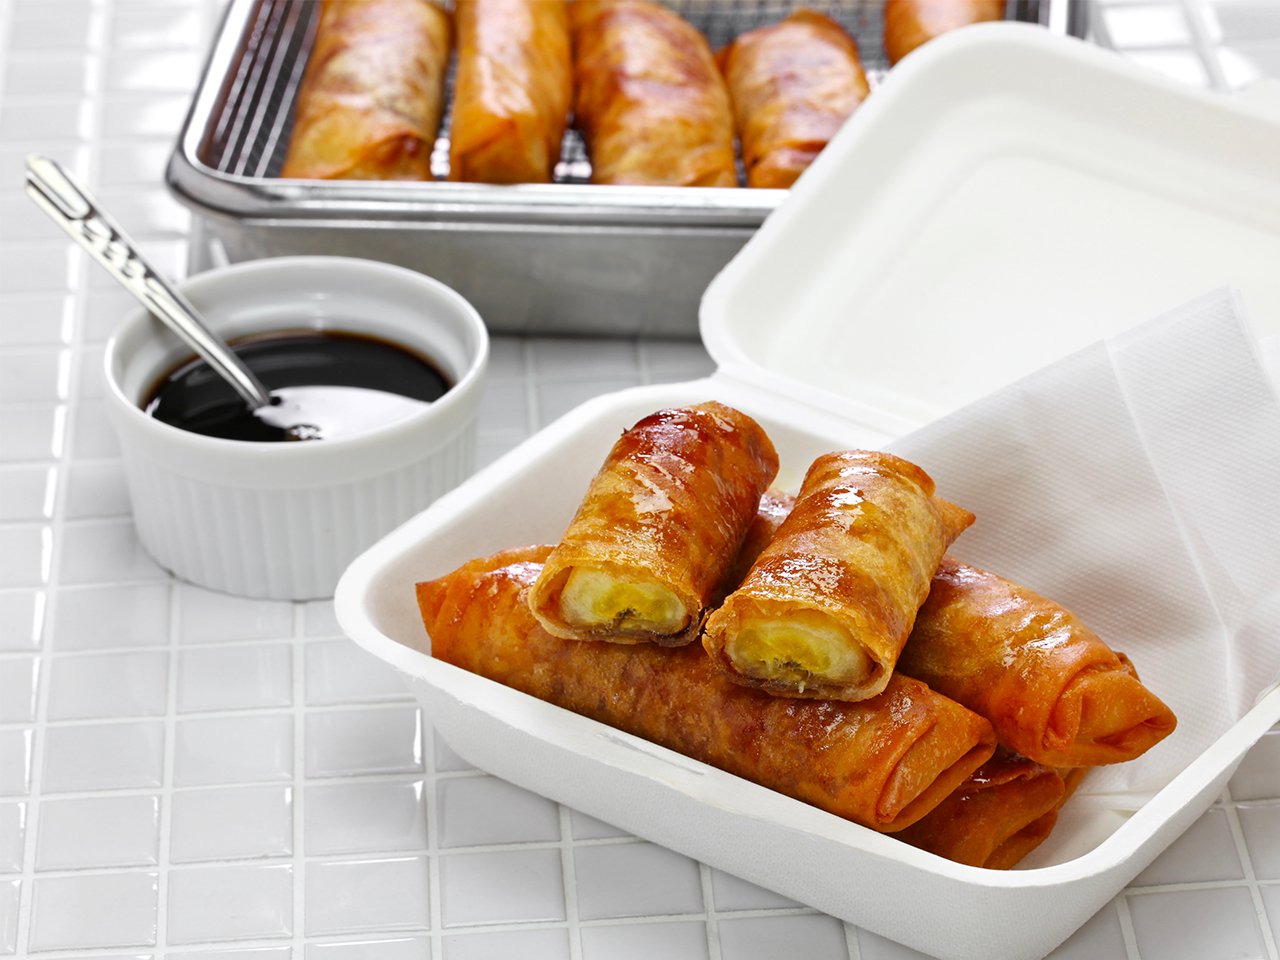 Turon in a styrofoam container 